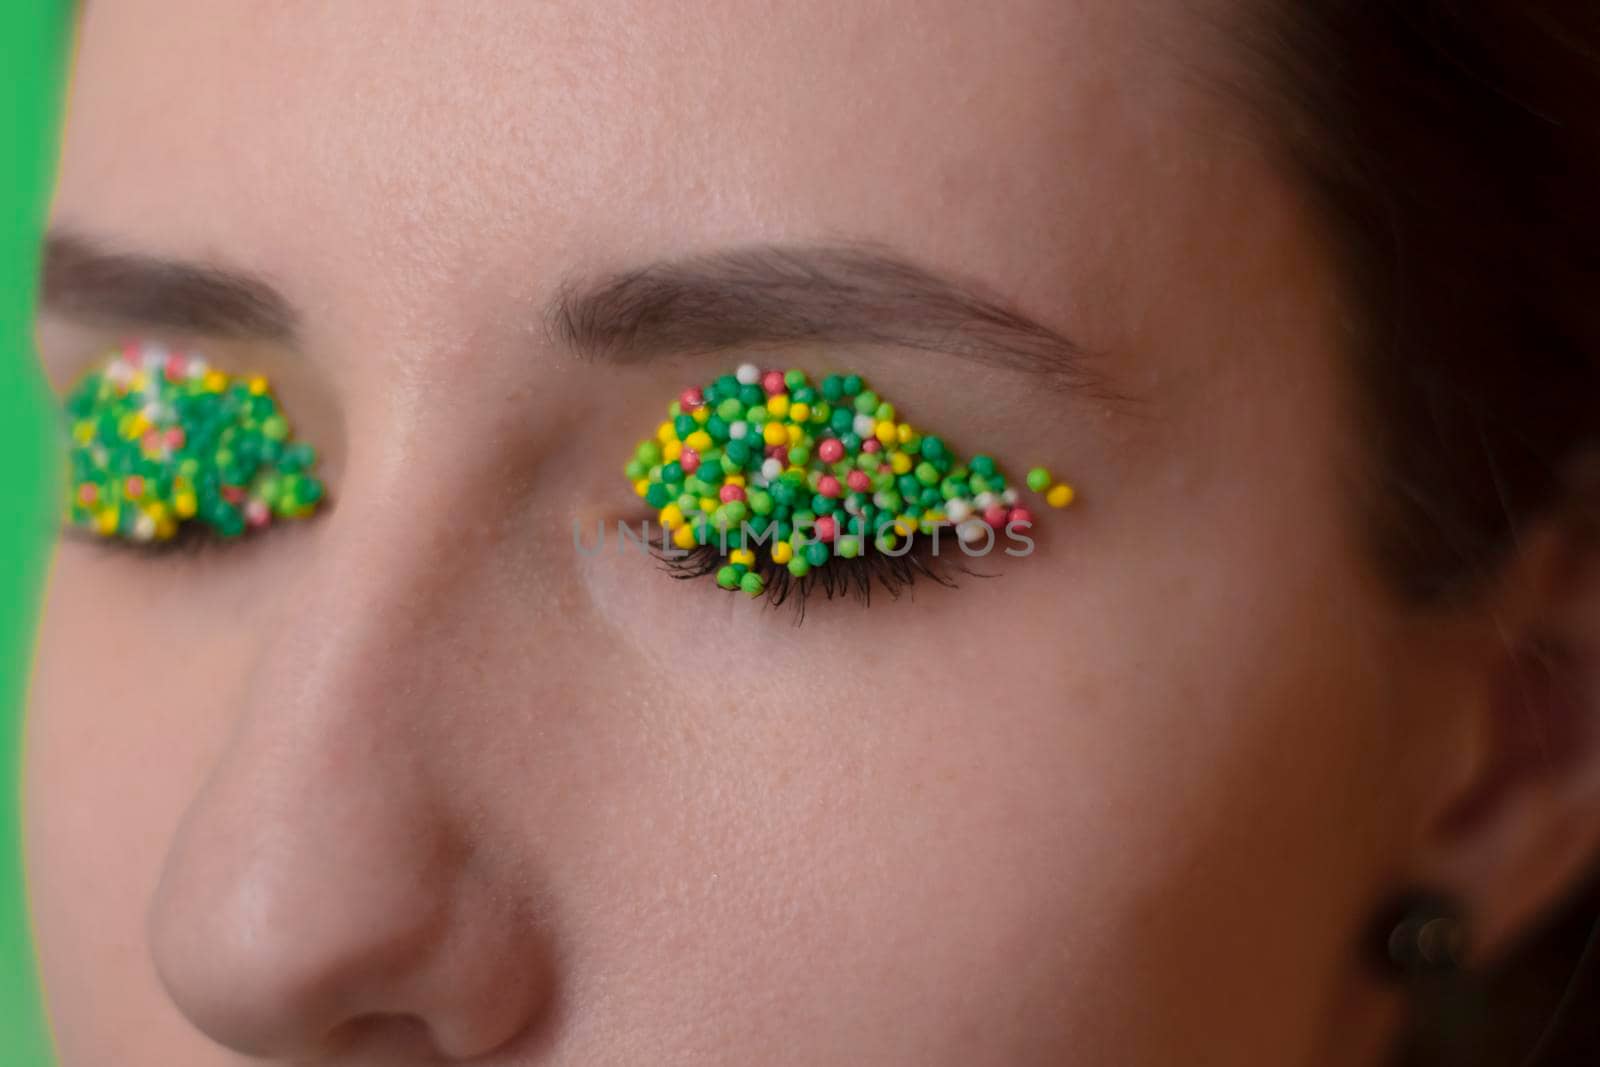 Young woman portrait with a candy makeup - multicoloured pastry topping pearls on her lips and eyelids. On a green and orange background. Easter theme. by oliavesna